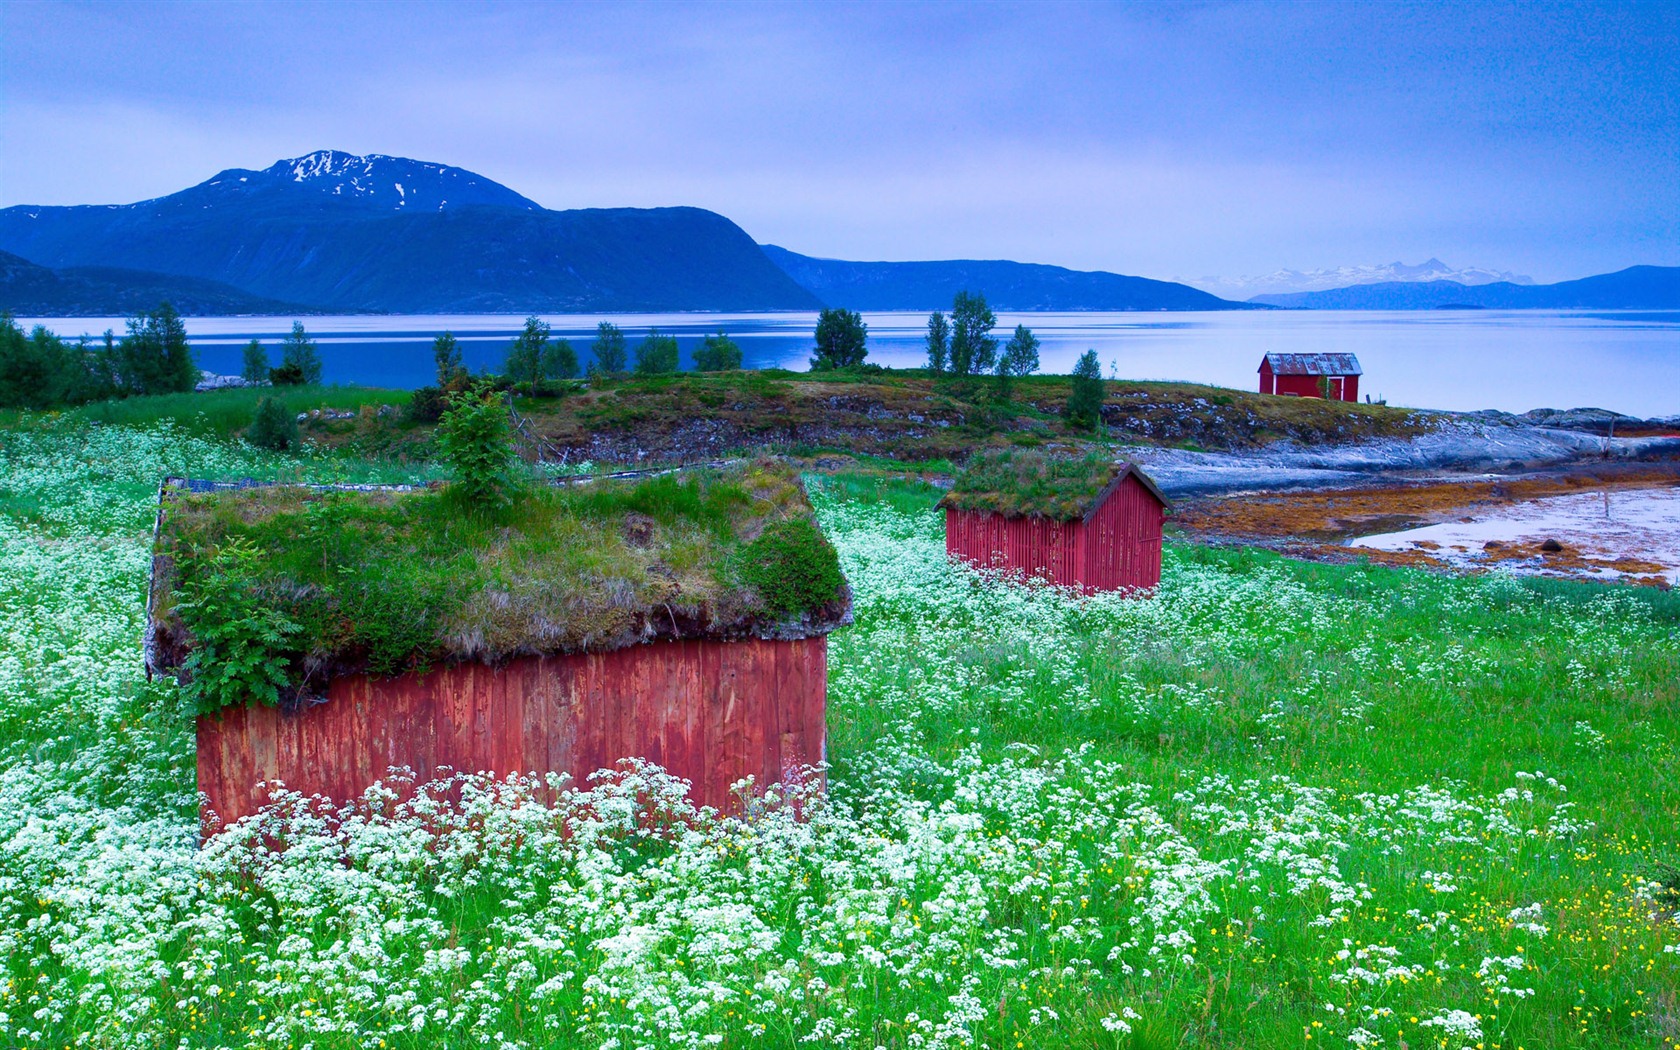 Windows 7 Wallpapers: Nordic Landscapes #3 - 1680x1050